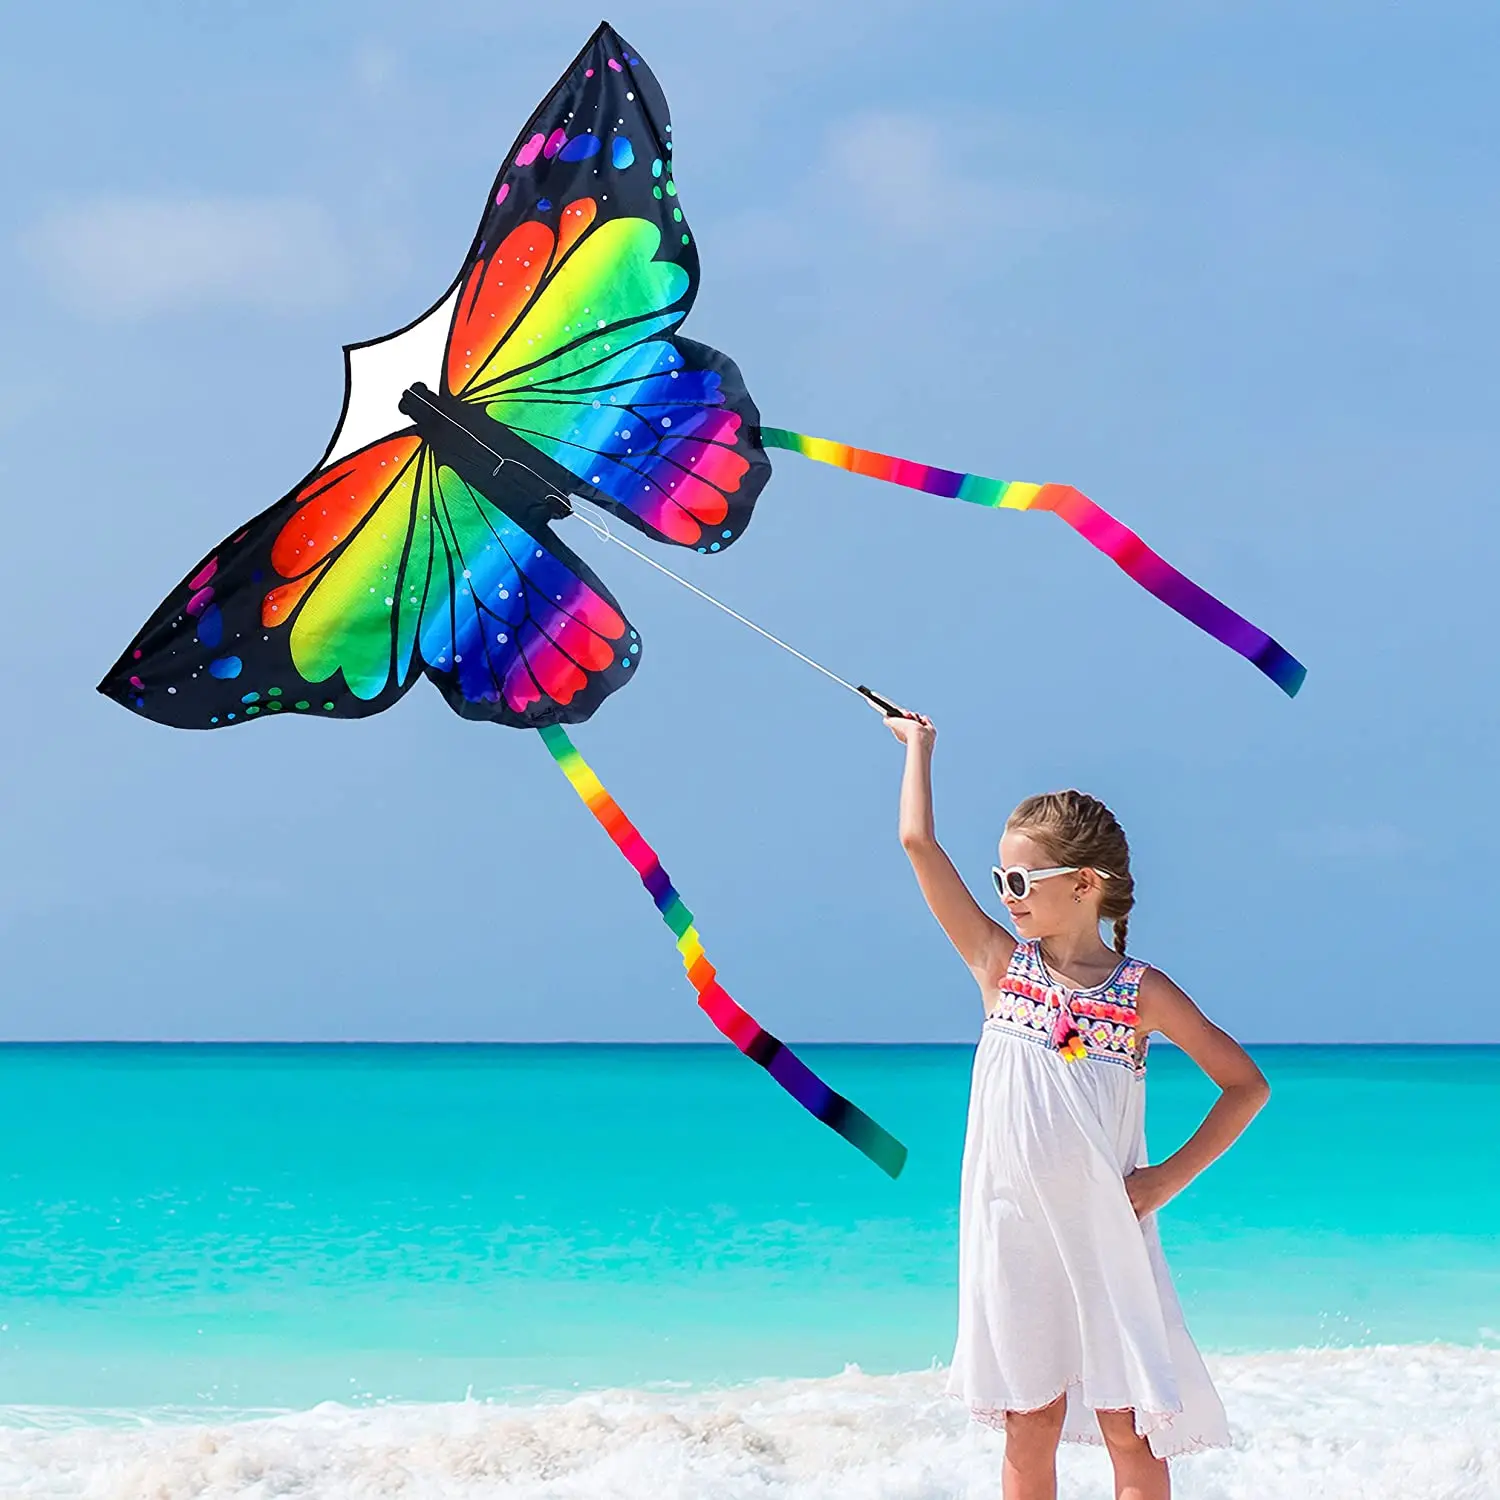 Easy to Fly and Assemble with 50 Meters Kite String KLT Kite for Kids and Adults Park Family Outdoor Games Beginners Kite for Girls Boys for Beach Trip Large Easy Flyer 51x45 with 8 Long Tails 